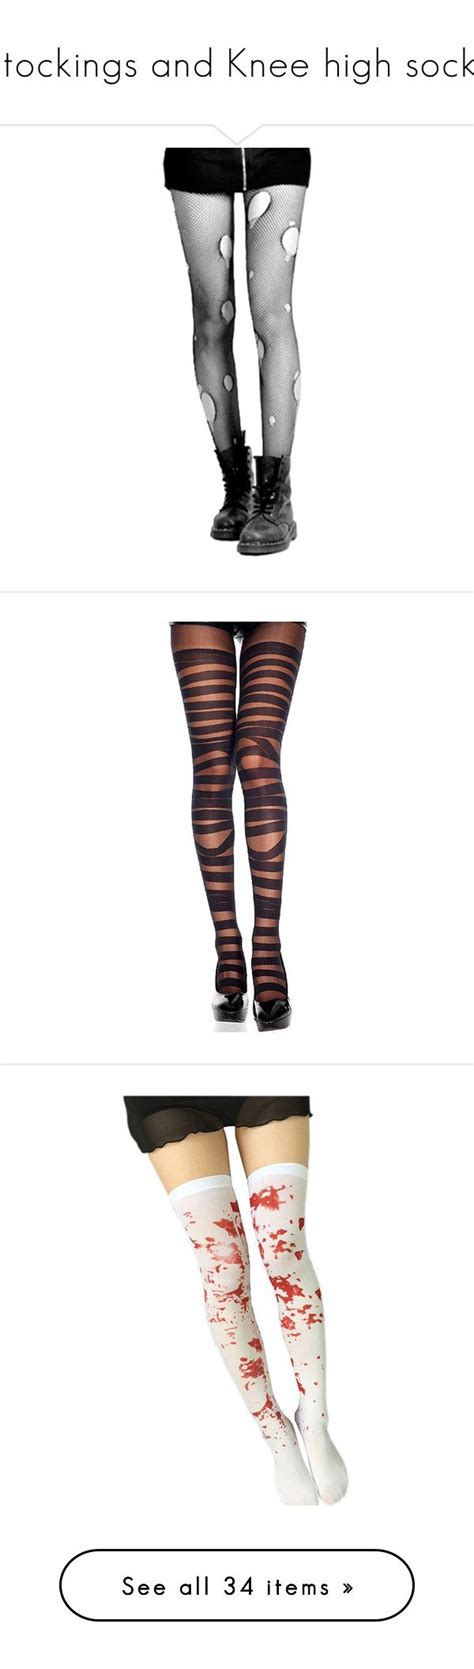 Stockings And Knee High Socks By Alice The Skatergirl Liked On Polyvore Featuring Intimates